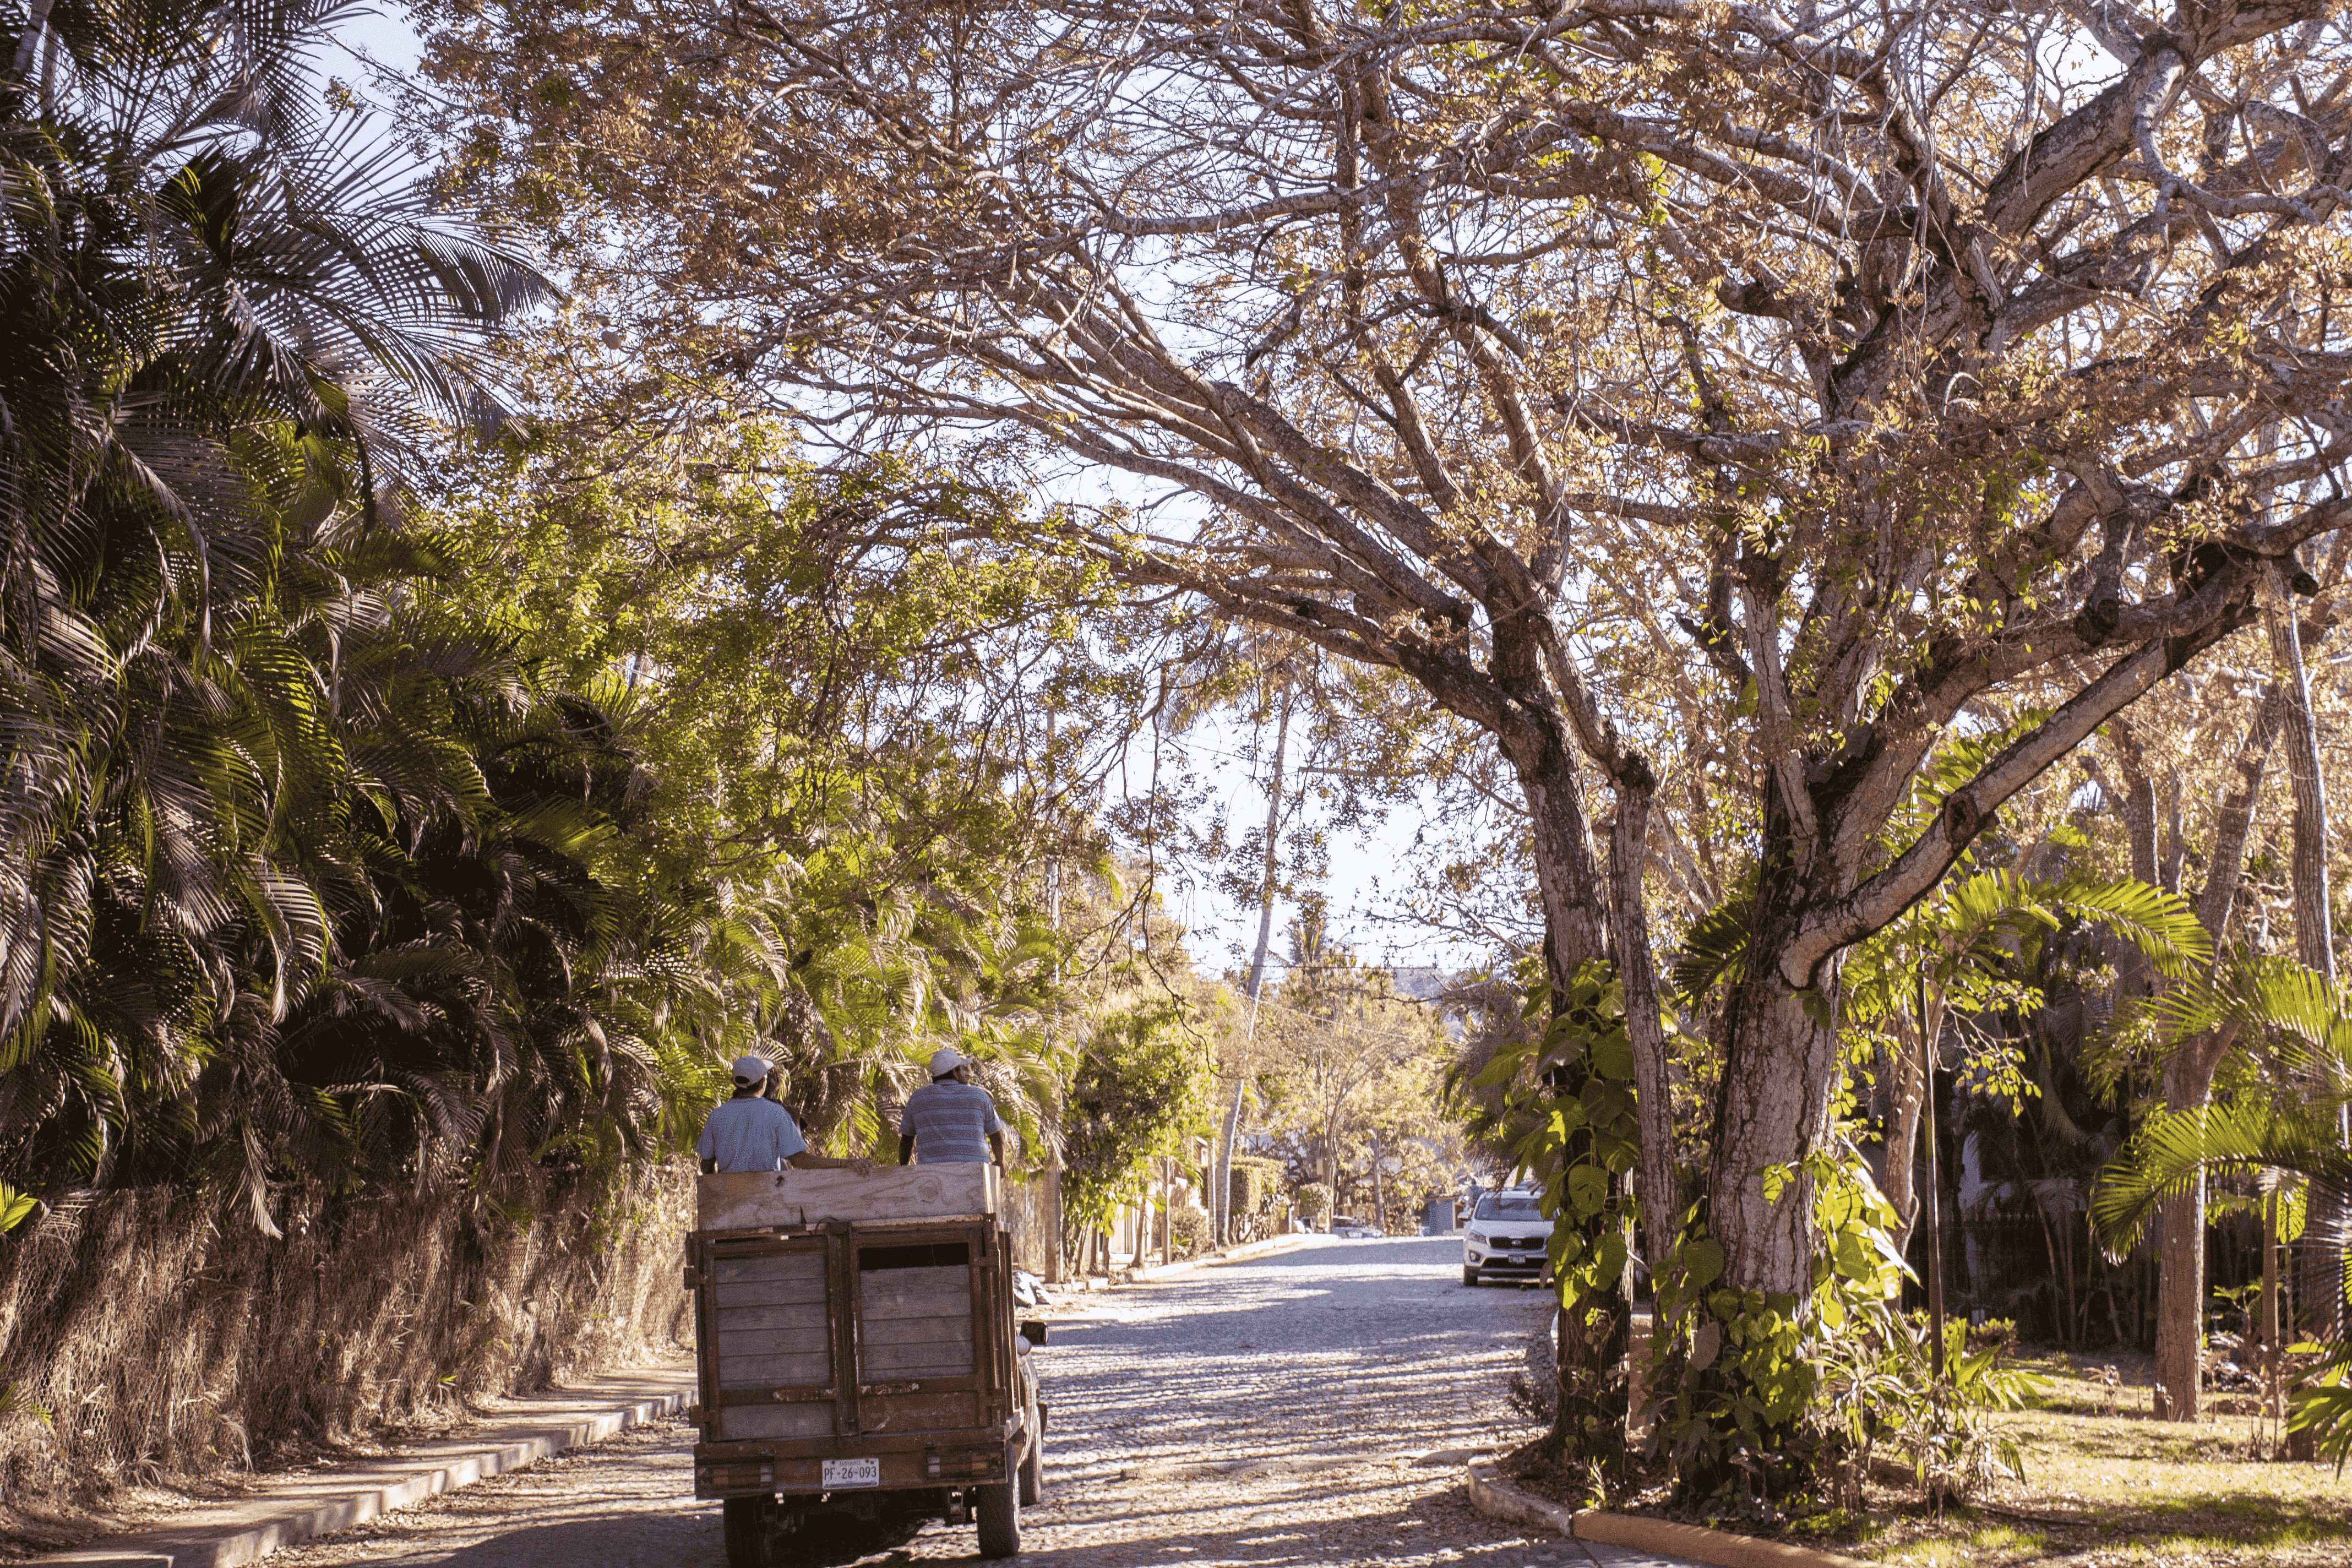 A little cart with two men in it moves down a stone road away from the camera. On the left, a lot of palms burst out from behind a stone wall, and on the right, a big tree branches out over the street.